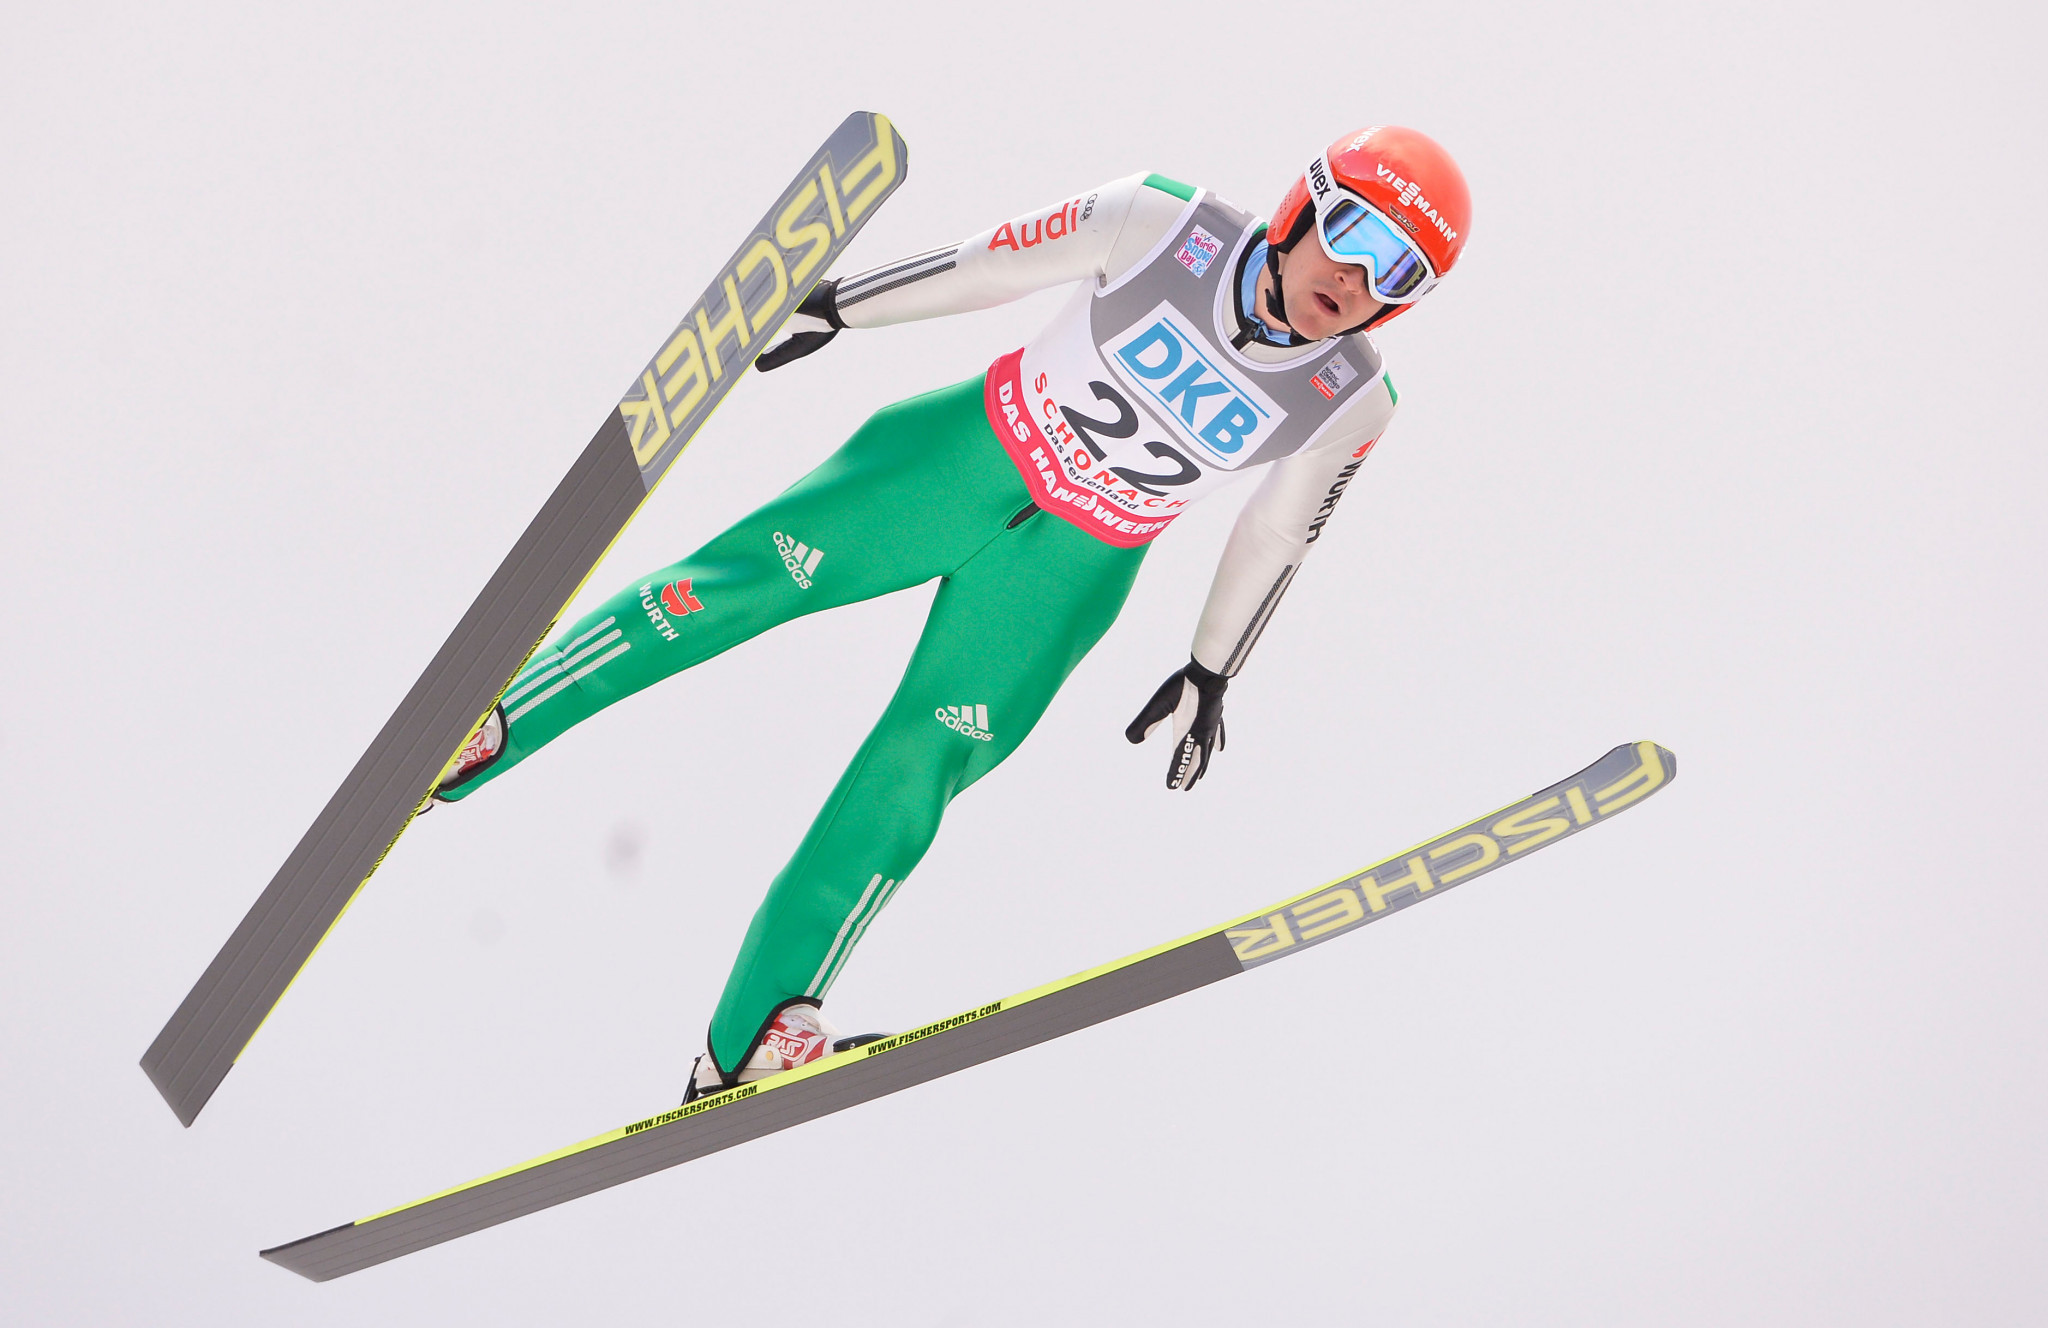 Tobias Haug made his decision following ski jumping crashes ©Getty Images